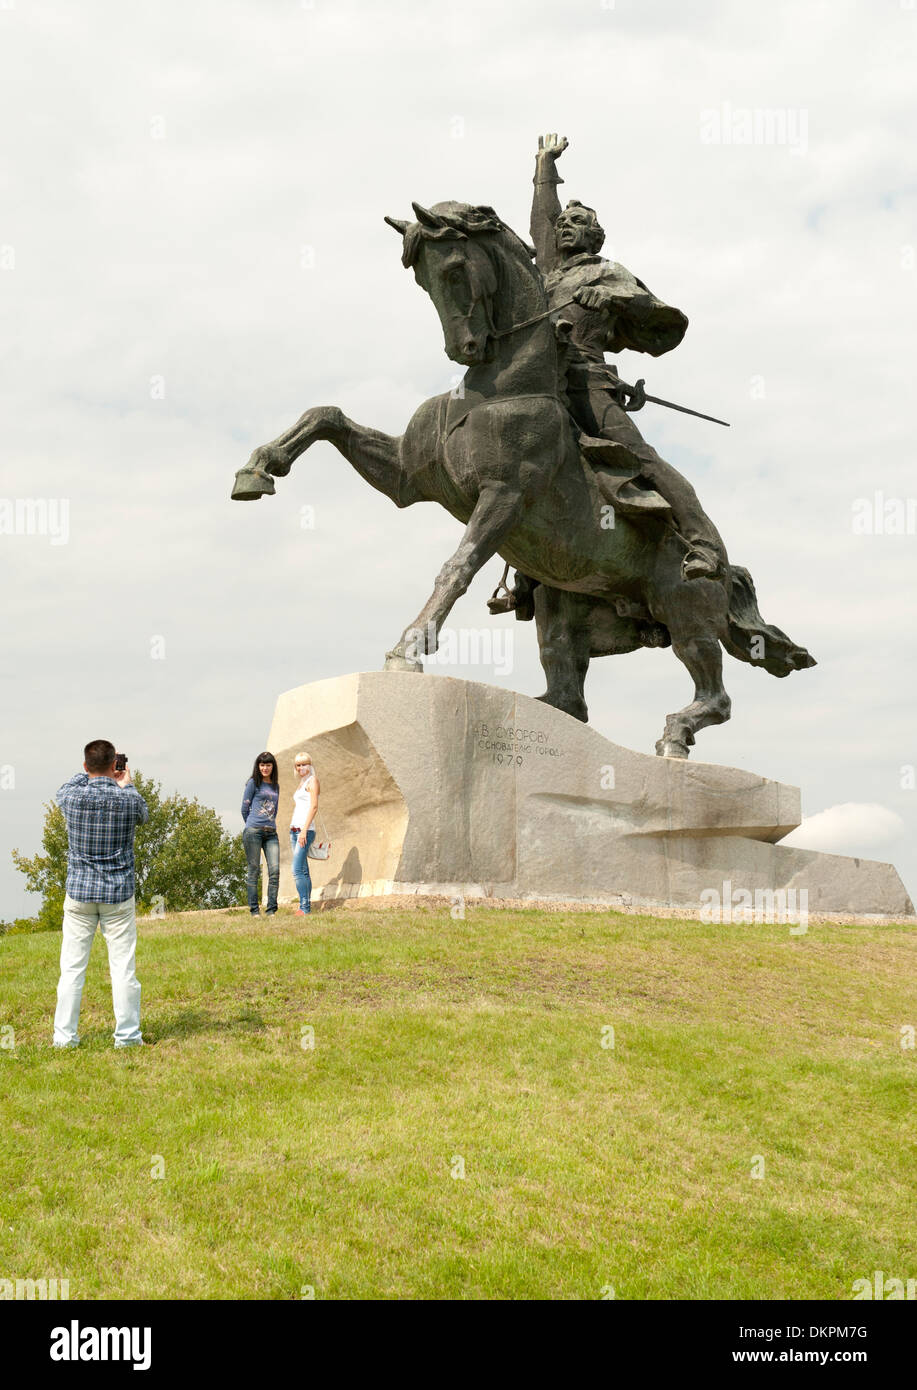 Tourists posing for photos at the Monument to Alexander Suvorov in Tiraspol, capital of Transnistria. Stock Photo